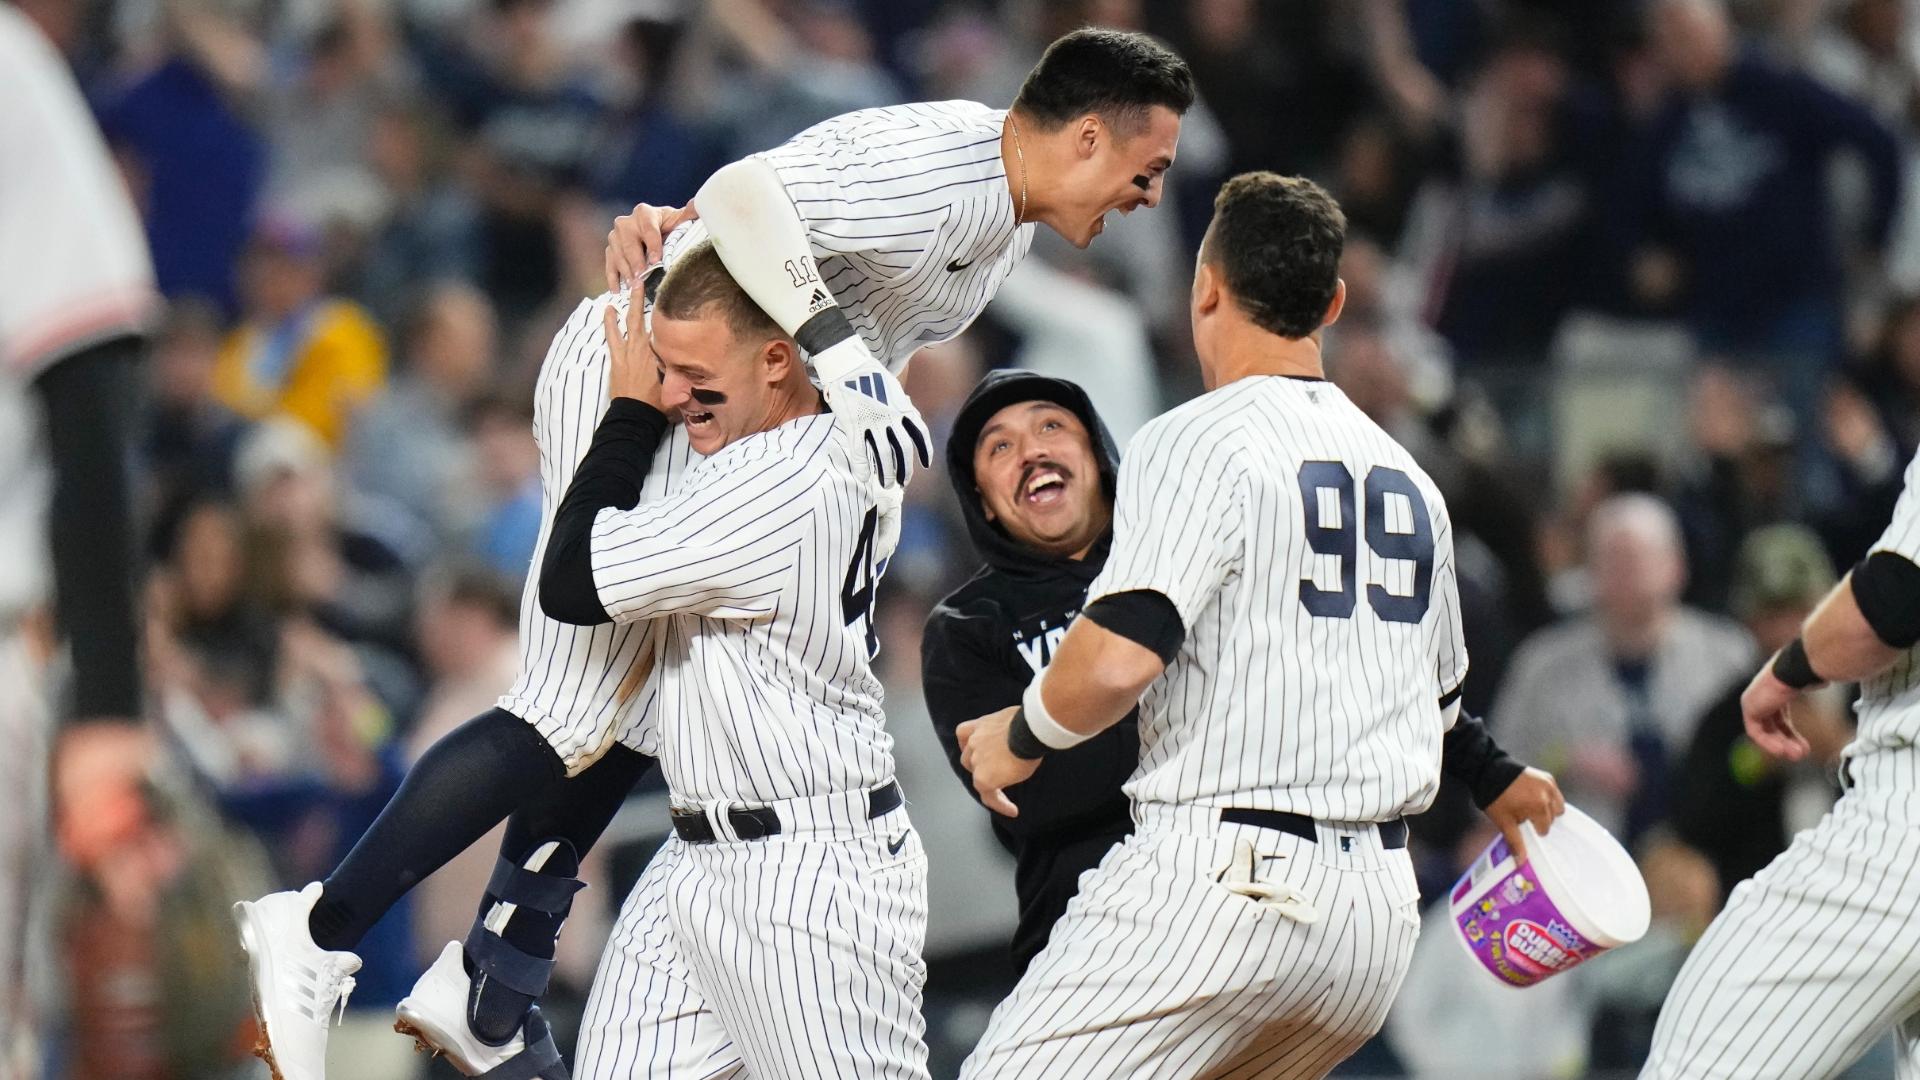 Judge hits tying HR in 9th, Volpe wins it in 10th as Yankees rally